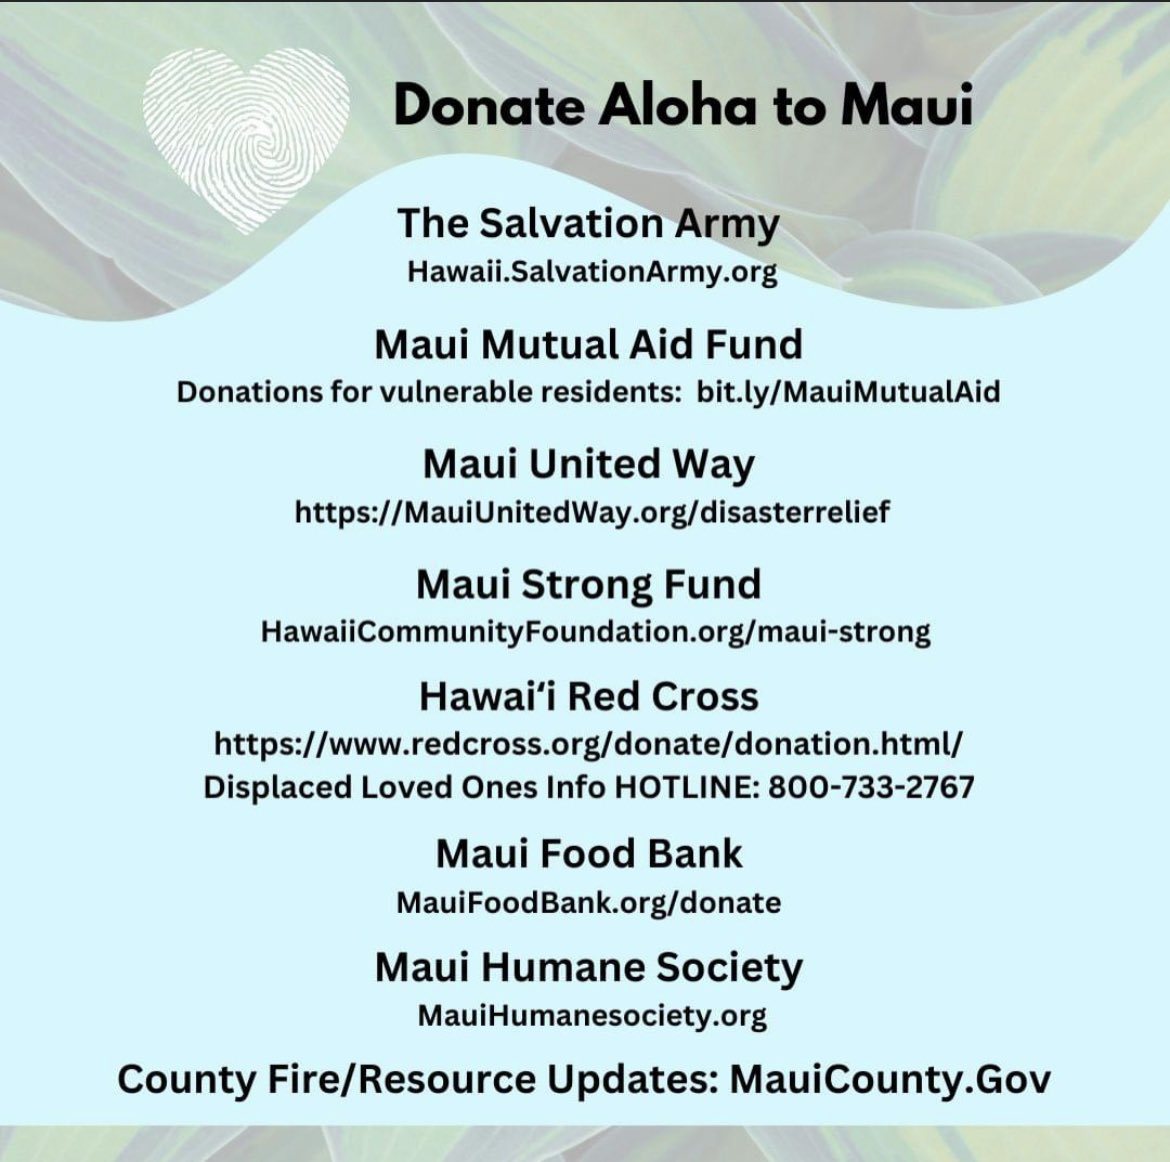 Time to show some true Aloha from the #9thISLAND and Las Vegas, Nevada for fire & wind battered #maui. Donation recommendations as of 8/10/23.
#hawaii #mauihawaii #mauifire #mauidonations #spreadaloha #lasvegas #LVCVA #lasvegasstrip #lasvegasfremontstreet #downtownlasvegas #pray